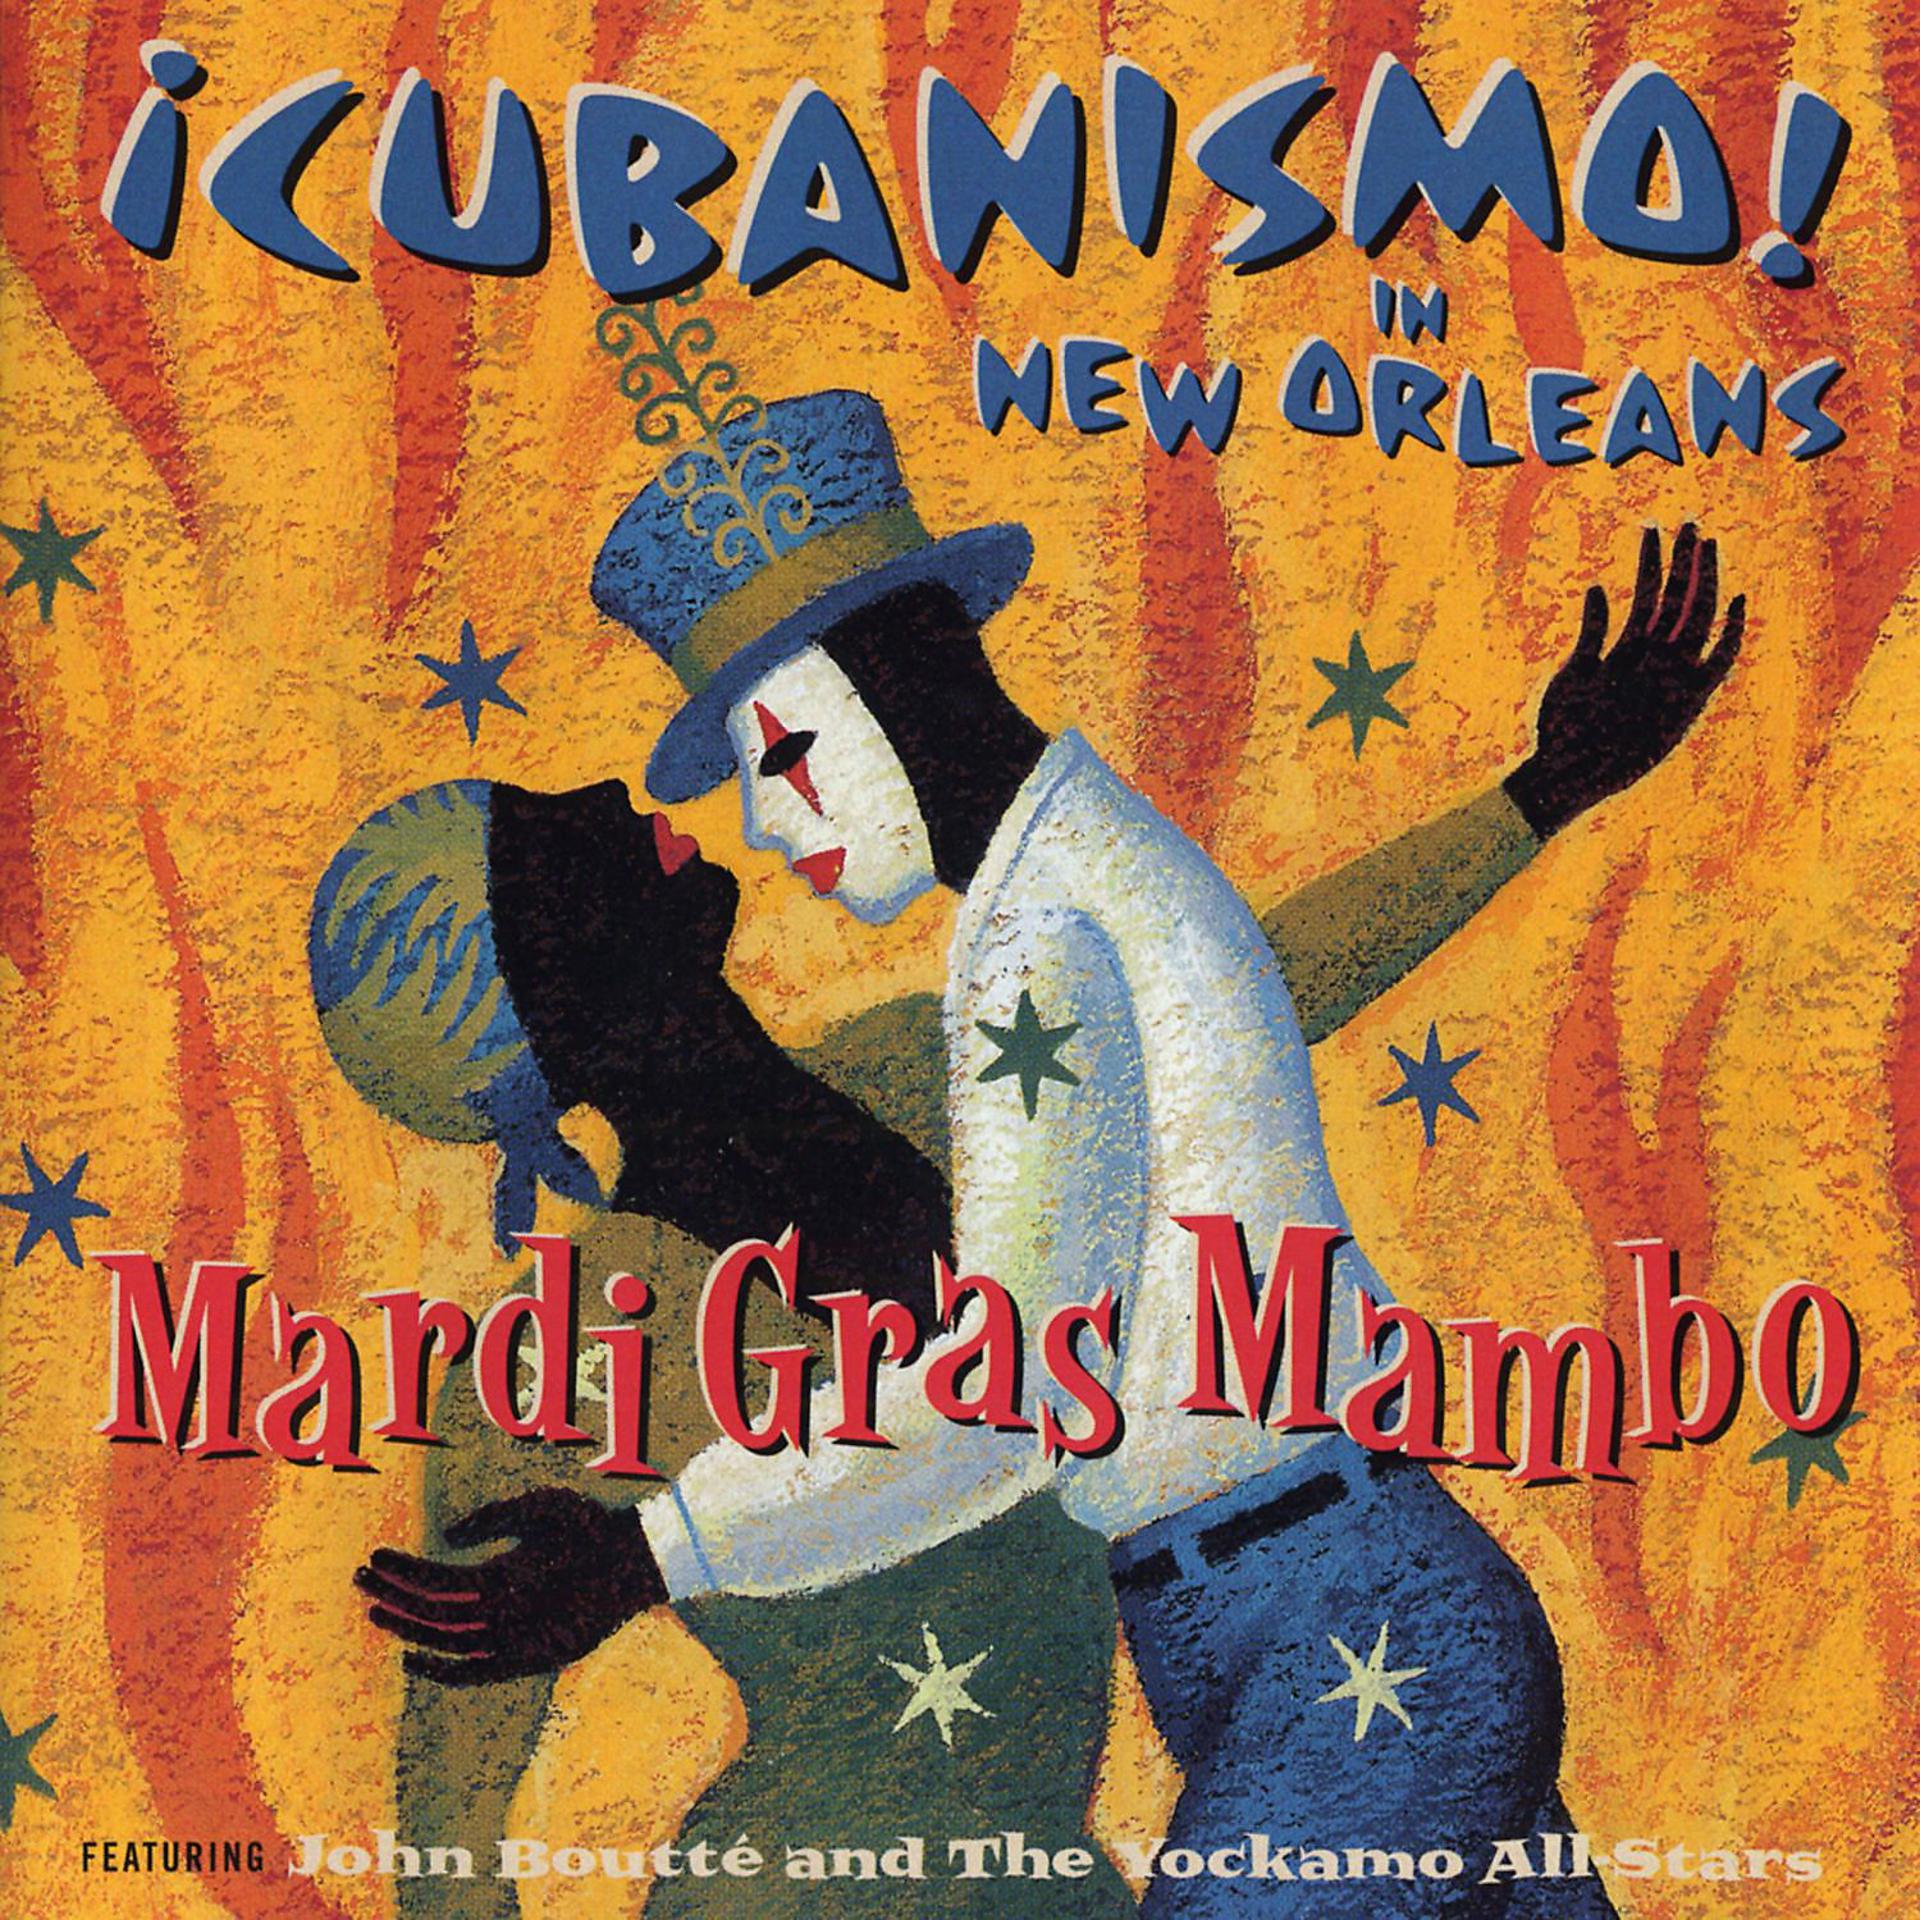 Постер альбома Mardi Gras Mambo - ¡Cubanismo! In New Orleans Featuring John Boutté And The Yockamo All-Stars